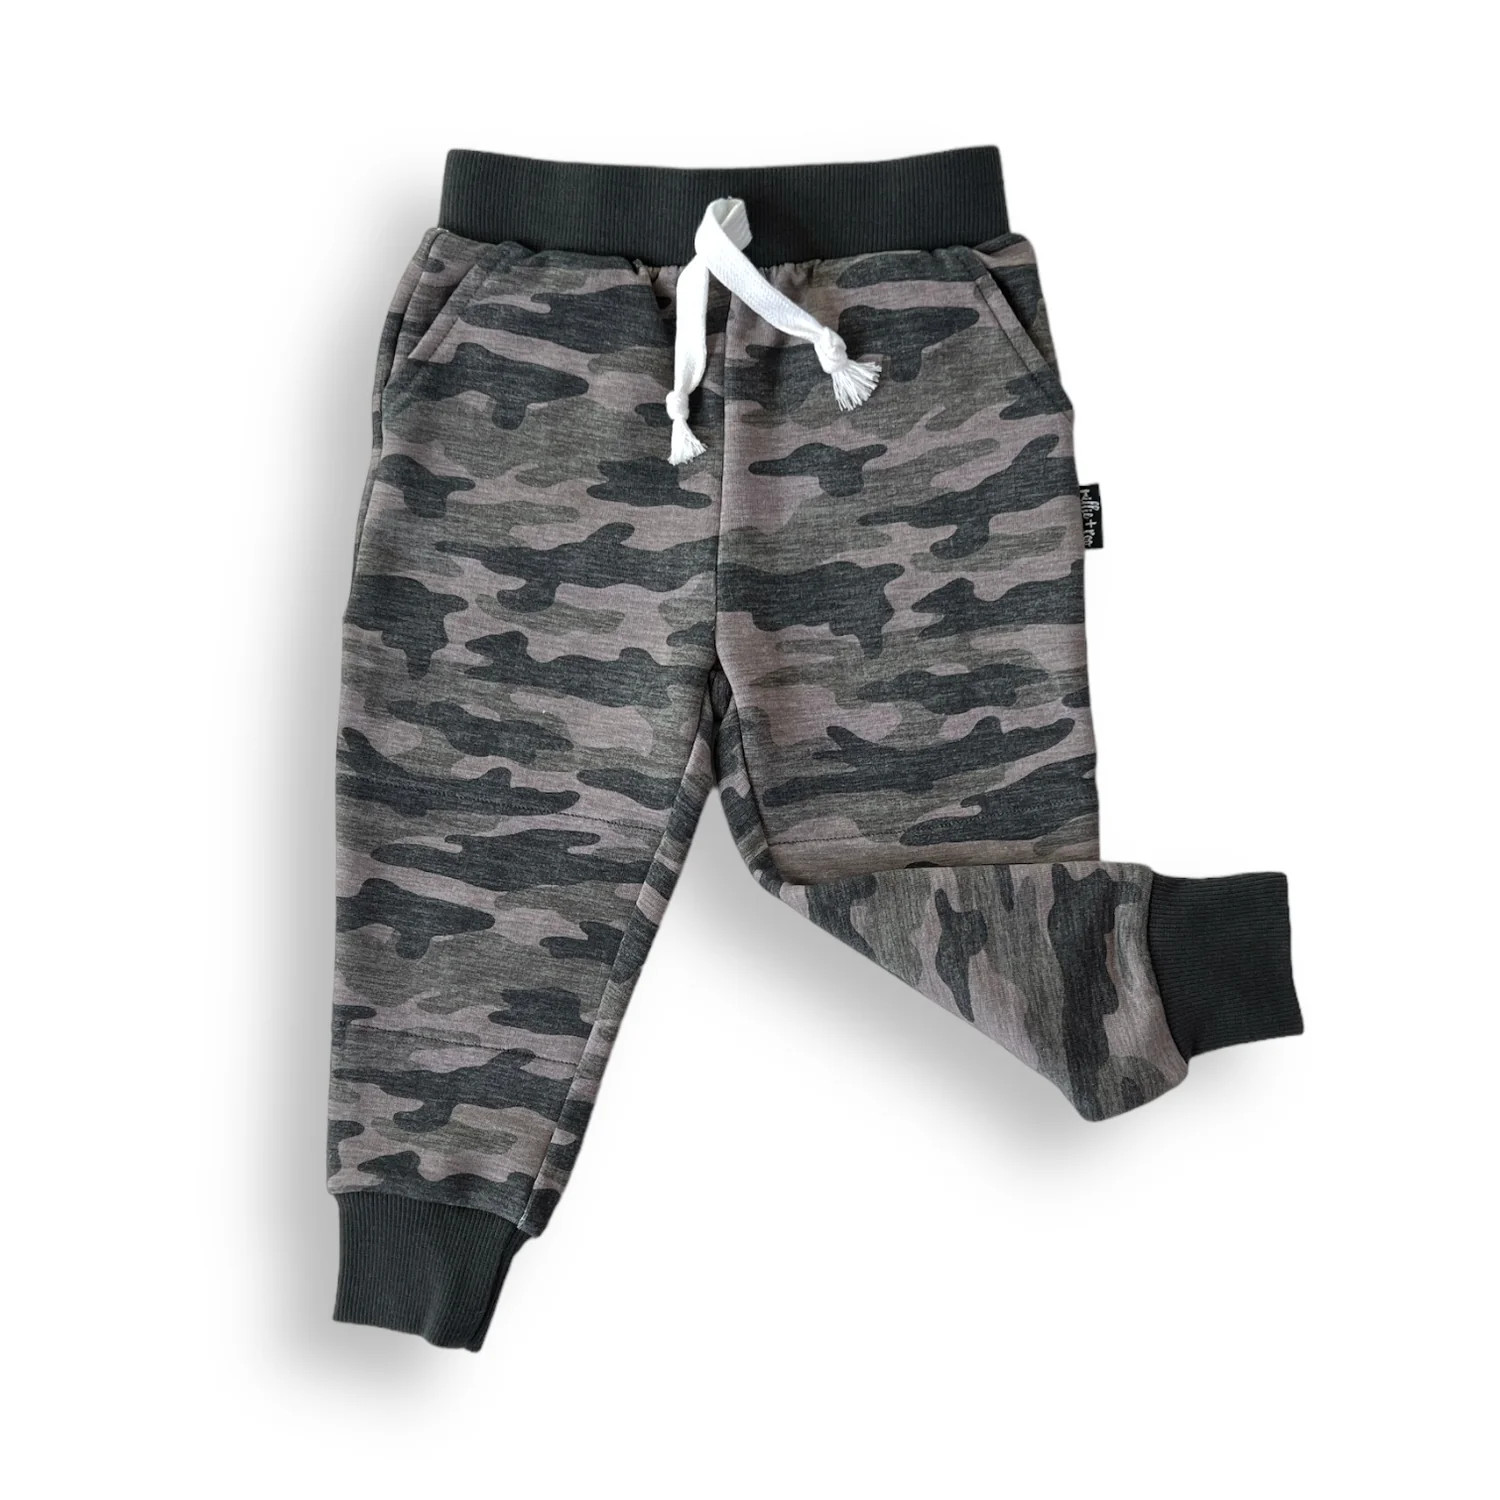 JOGGERS- Chris Camo Bamboo French Terry | millie + roo